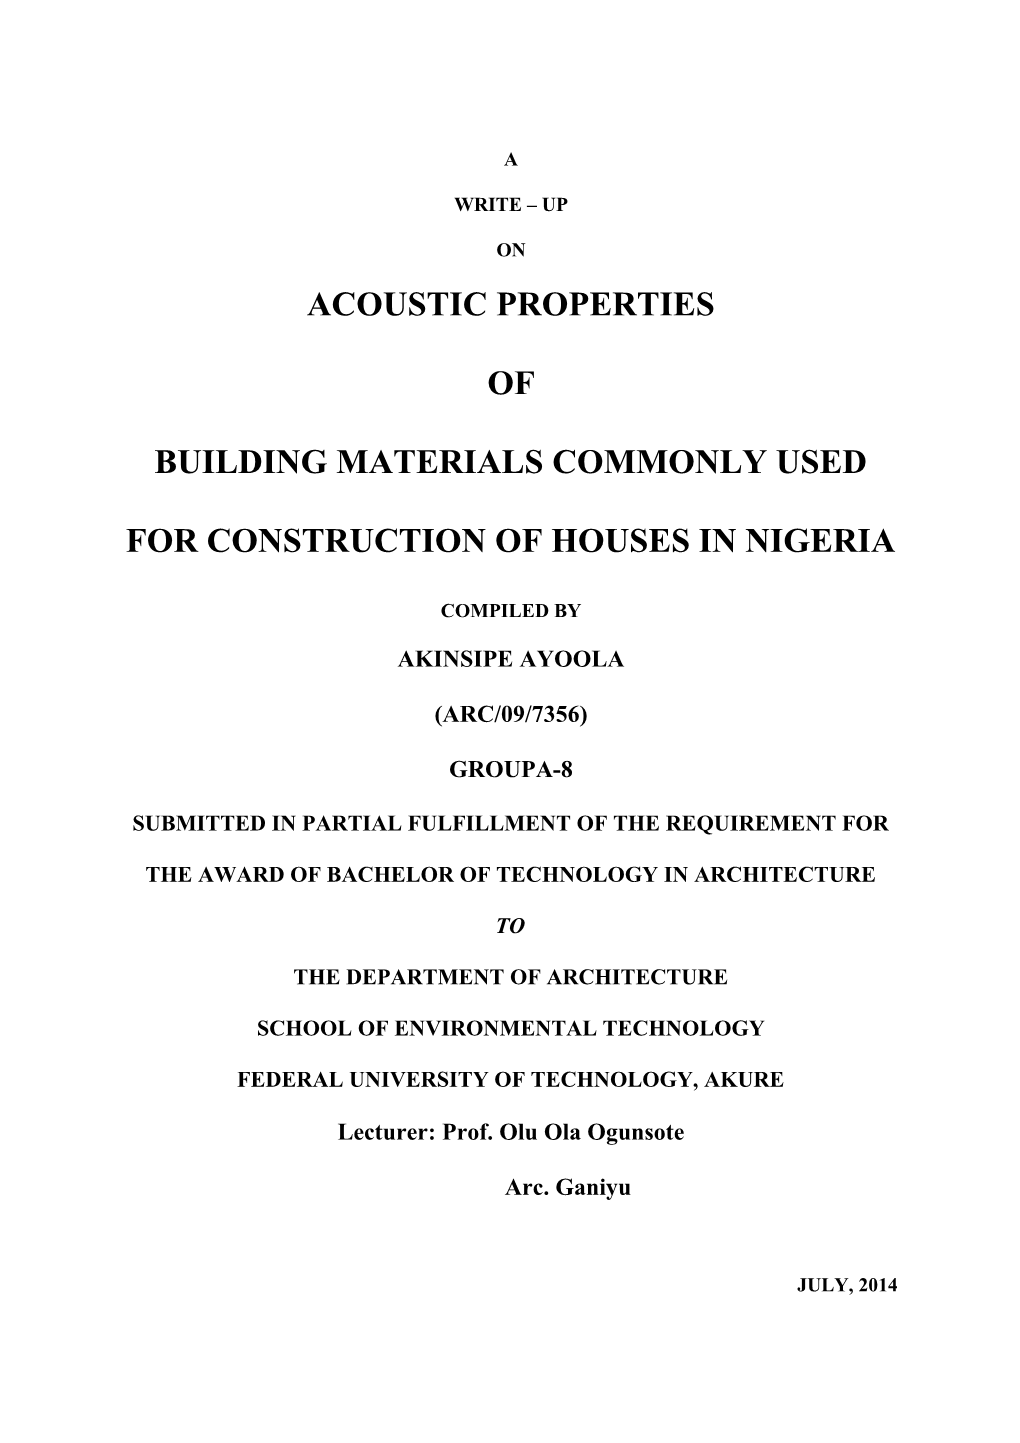 Building Materials Commonly Used for Construction of Houses in Nigeria